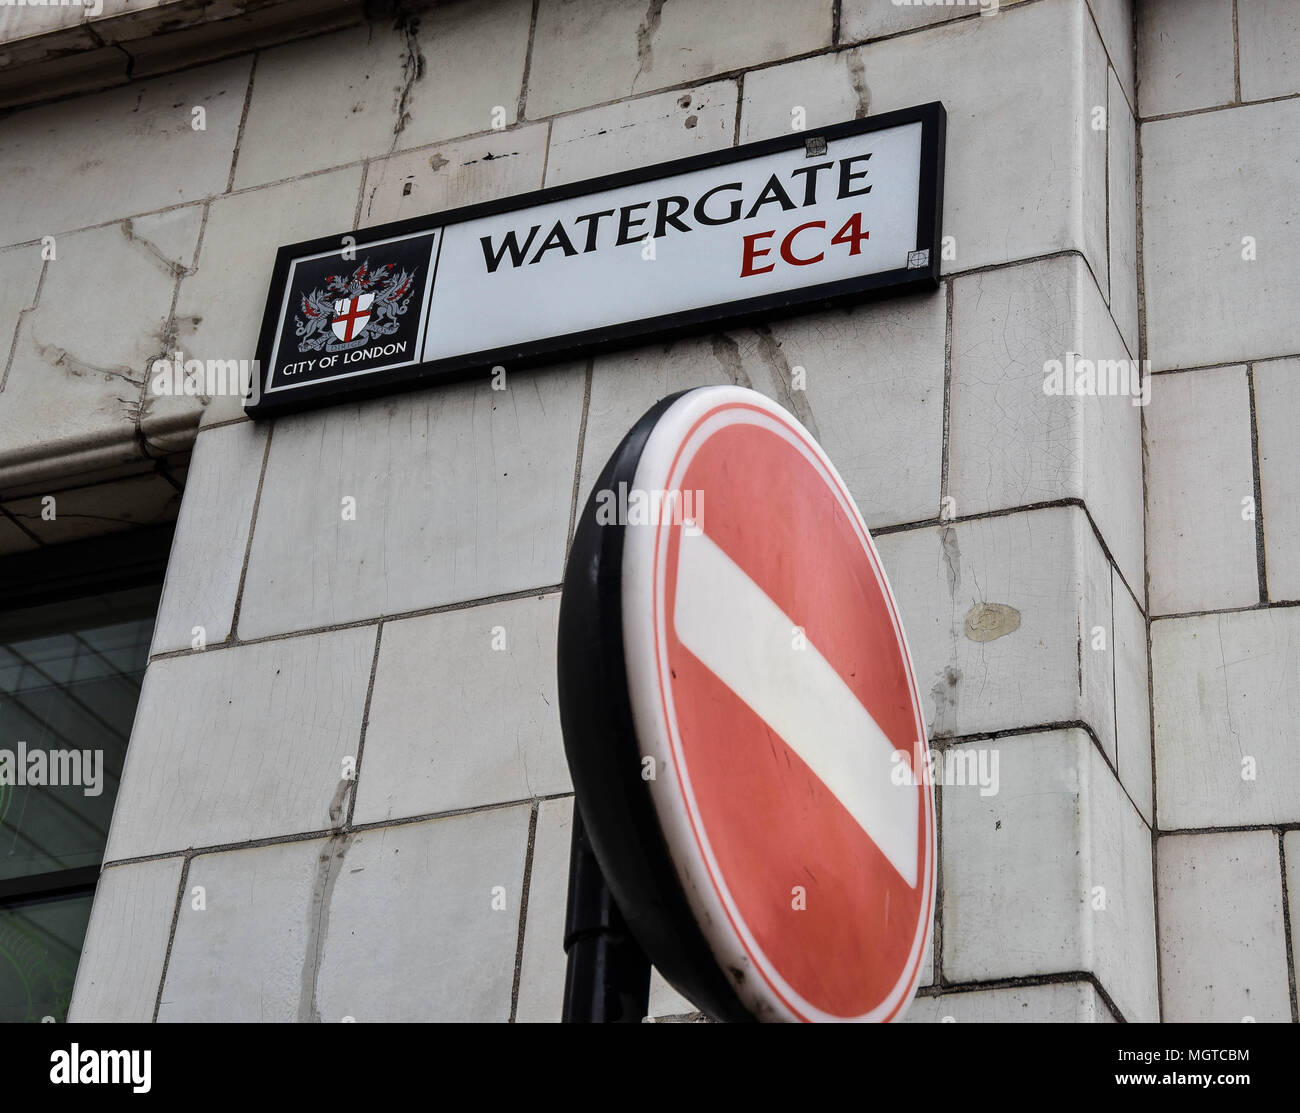 street sign of watergate, london with stop sign Stock Photo